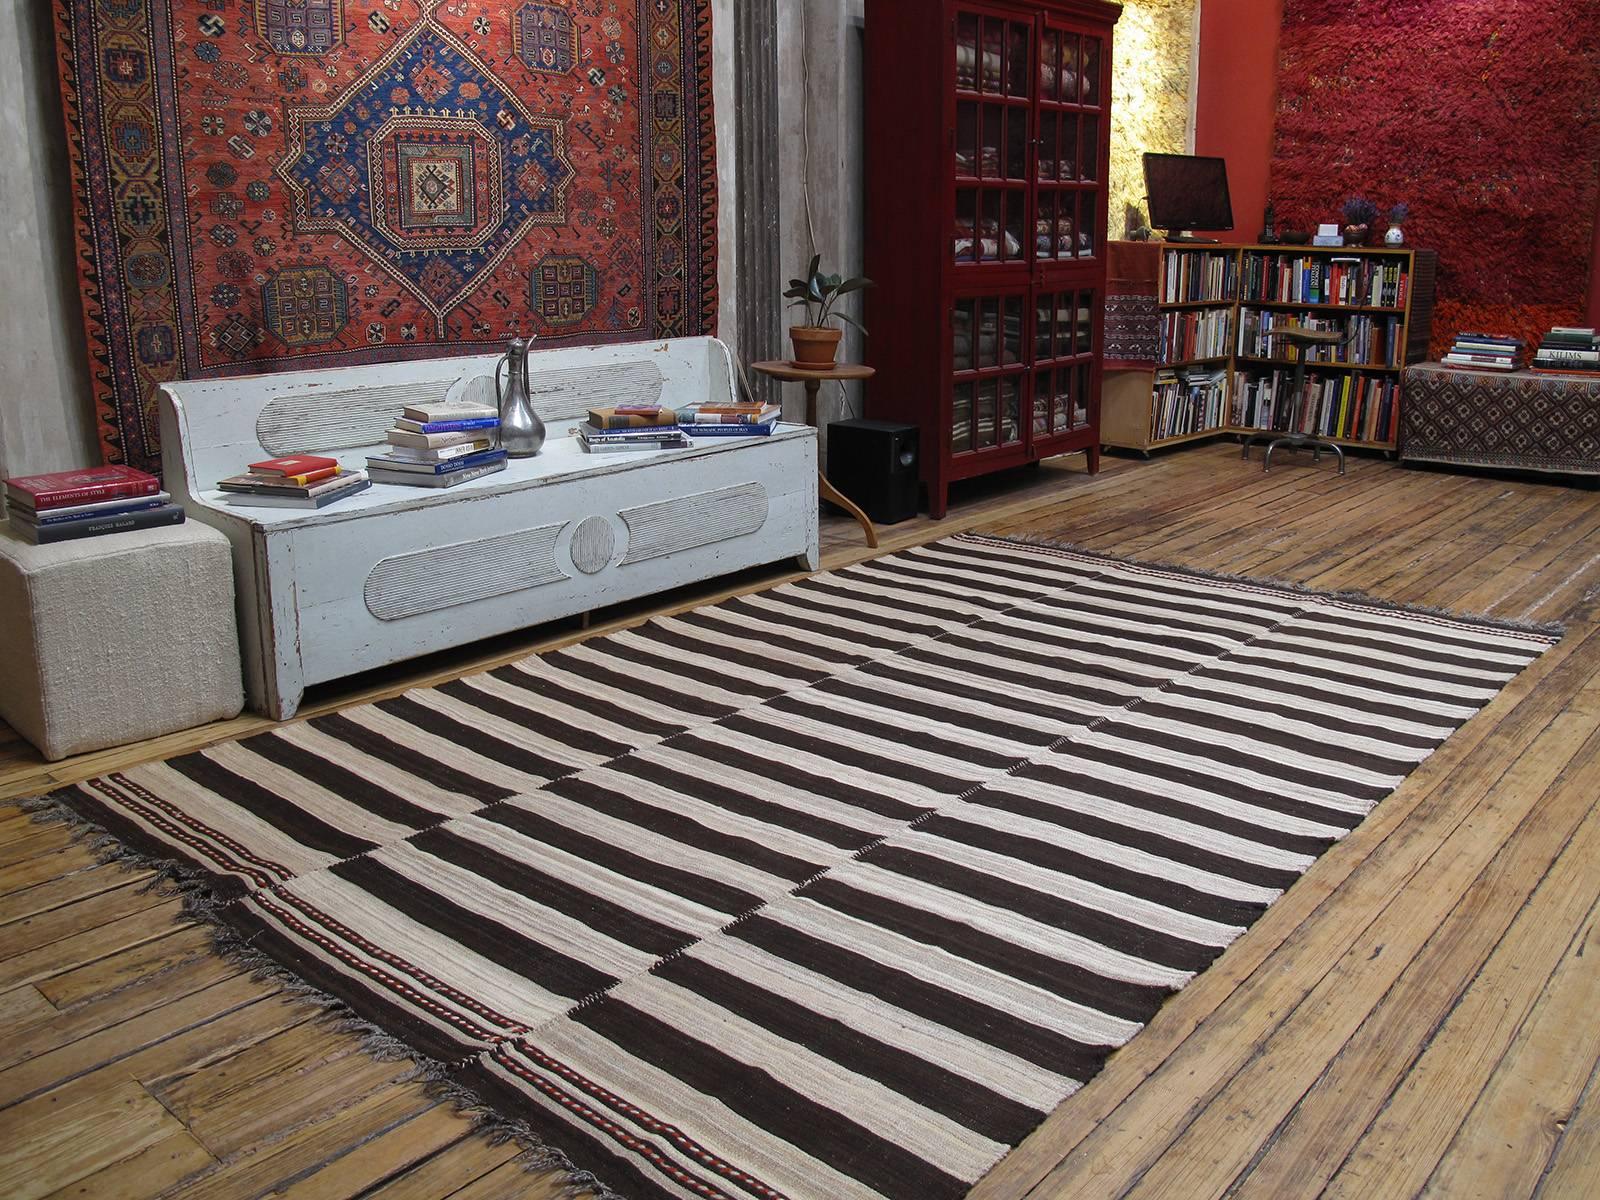 An old tribal floor cover from Northern Iran, woven in three narrow panels with alternating bands of ivory and dark brown. A strikingly modern look with great texture and patina that cannot be replicated in contemporary weavings.